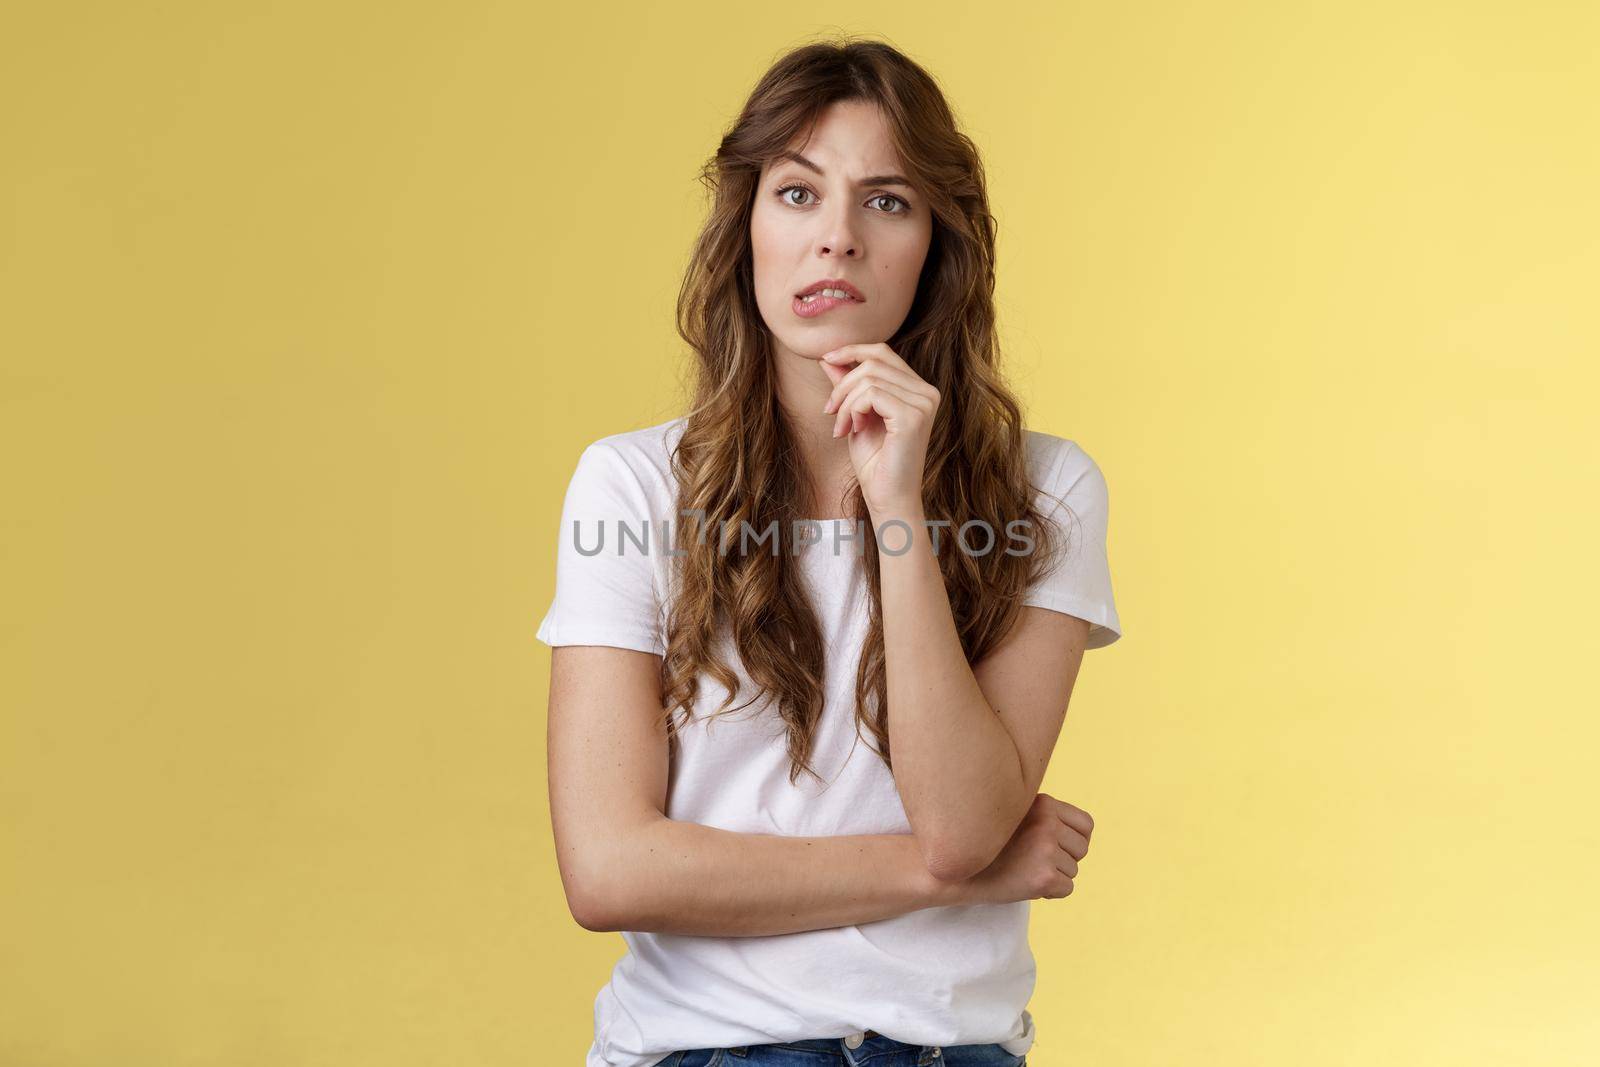 Troublesome situation give sec think. Intrigued thoughtful focused smart girlfriend thinking touch chin bite lip look camera focused pondering choice making decision solve problem yellow background.